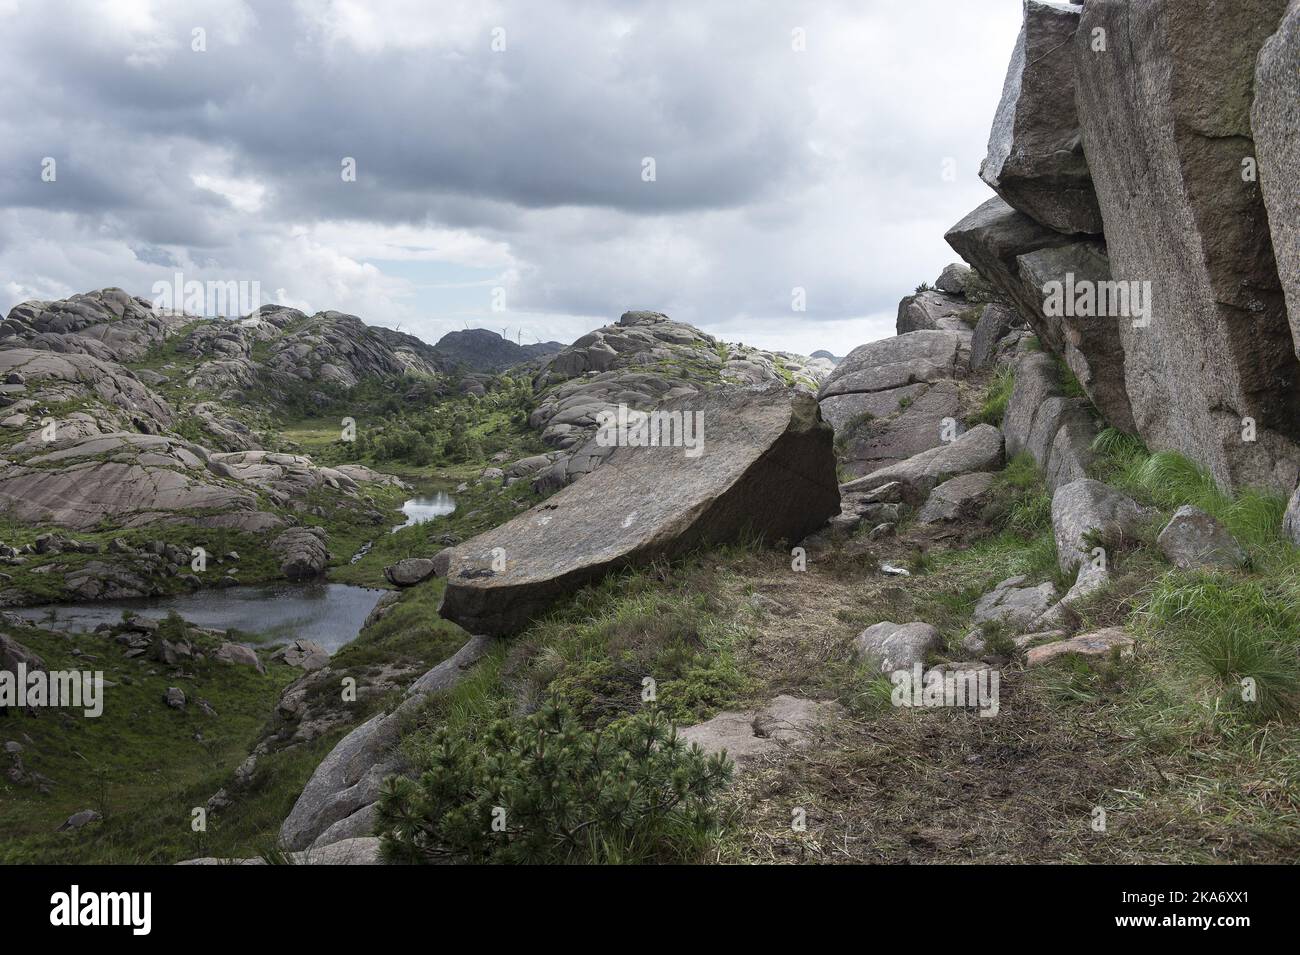 Kjervall, Egersund 20170624. The rock formation Trollpikken in Rogaland , western Norway has probably been vandalized during the night between Friday and Saturday. Poto: Carina Johansen / NTB Scanpix  Stock Photo